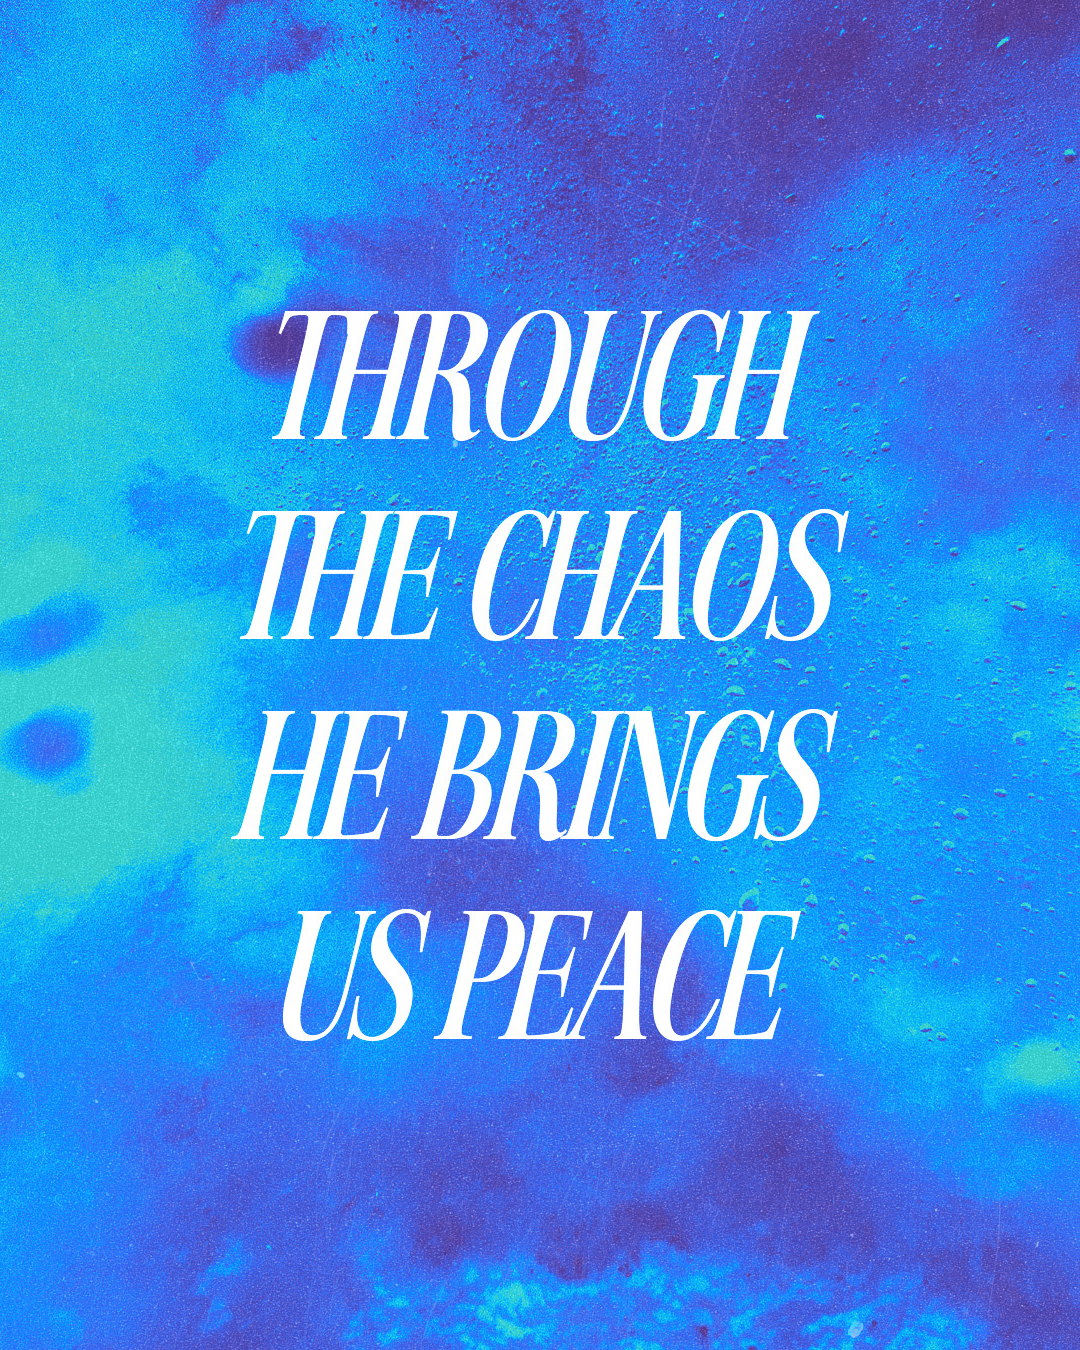 Through the chaos He brings us peace